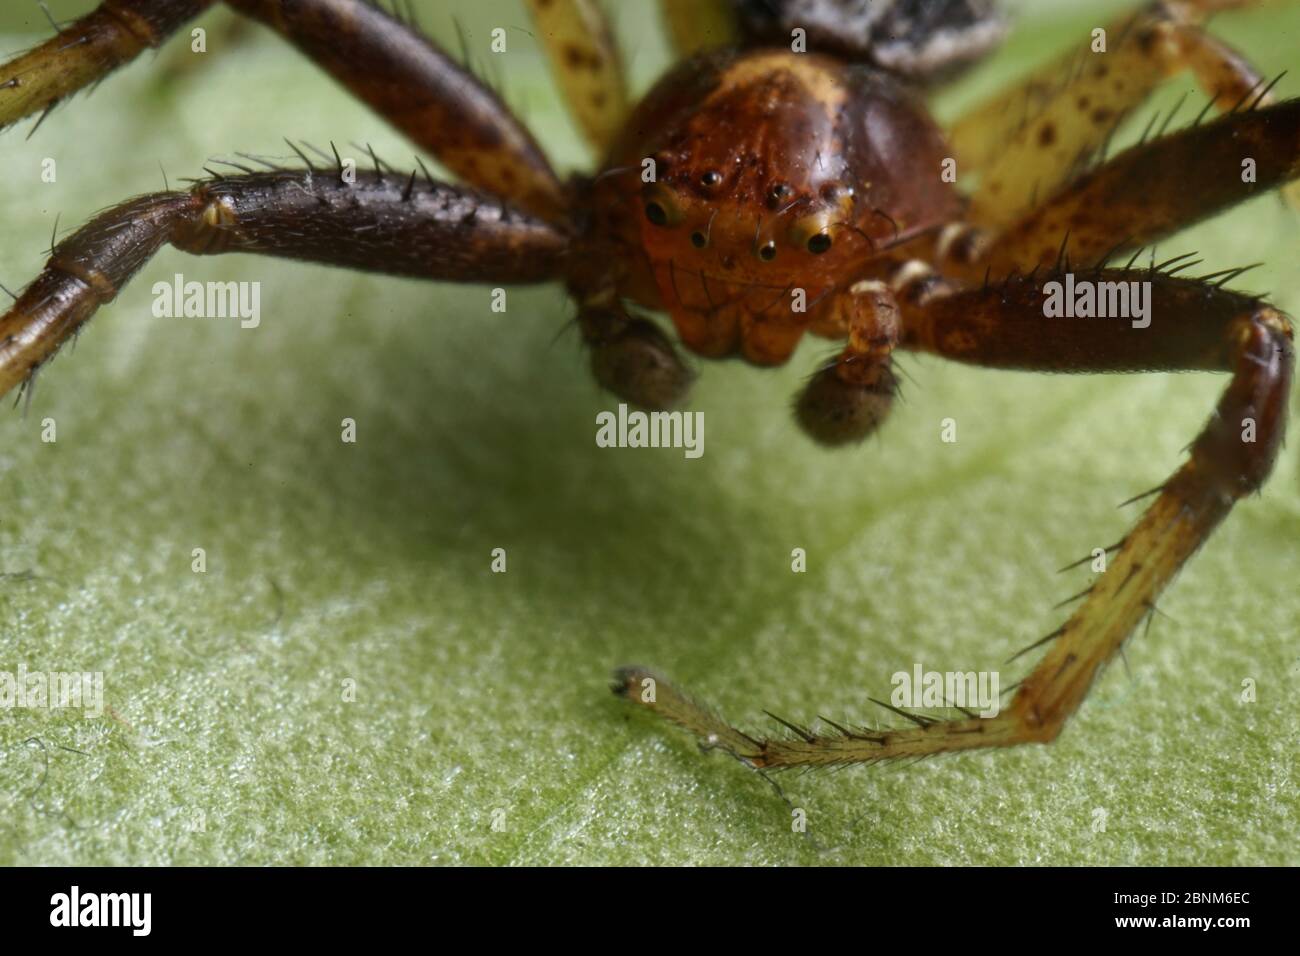 Super close up with face and eye details of male Xysticus lanio (Red Crab-spider),7mm long, on a leaf. Stock Photo